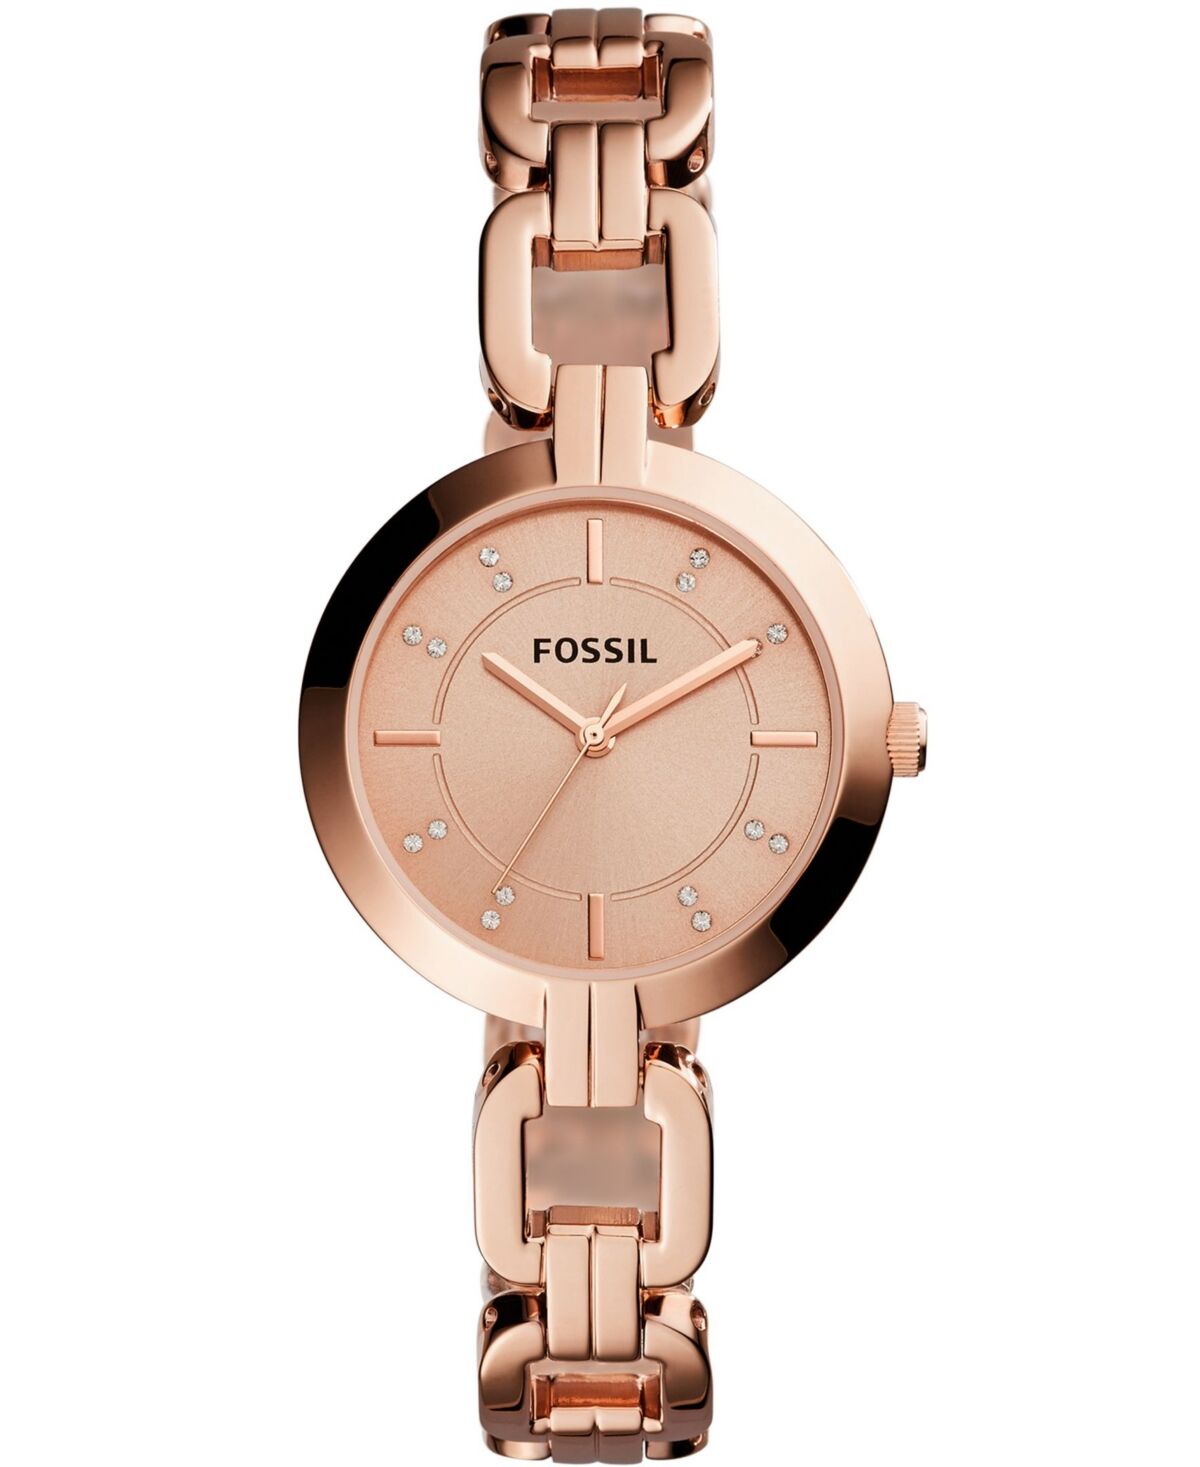 Fossil Women's Kerrigan Three Hand Rose Gold Stainless Steel Watch 32mm - Rose Gold